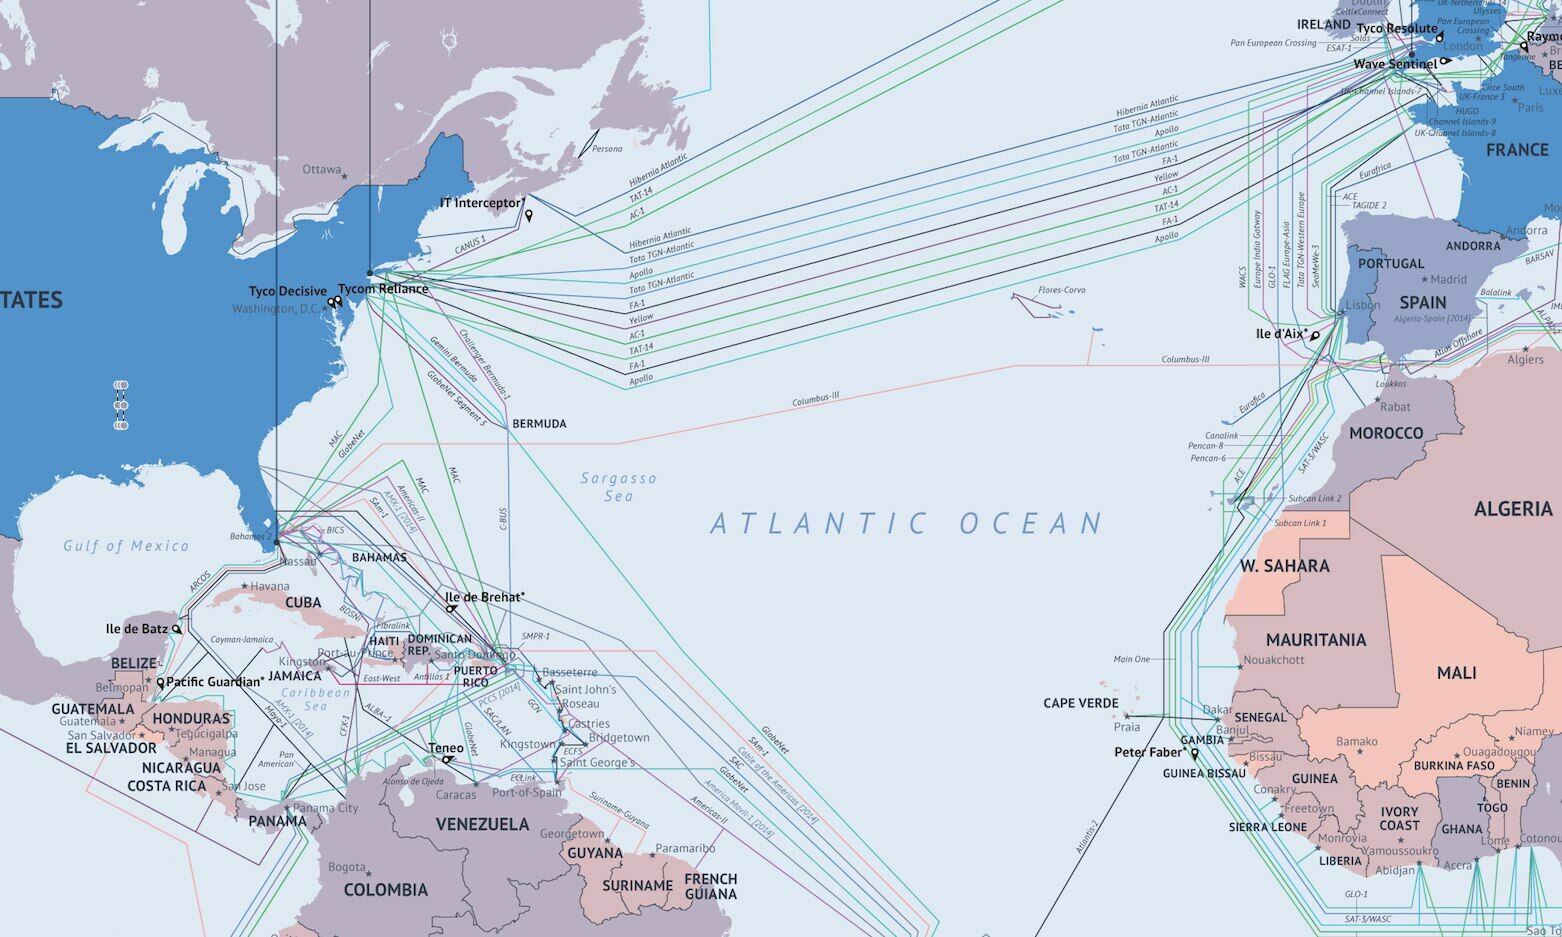 The war will go under water: Britain will try to protect transatlantic cables